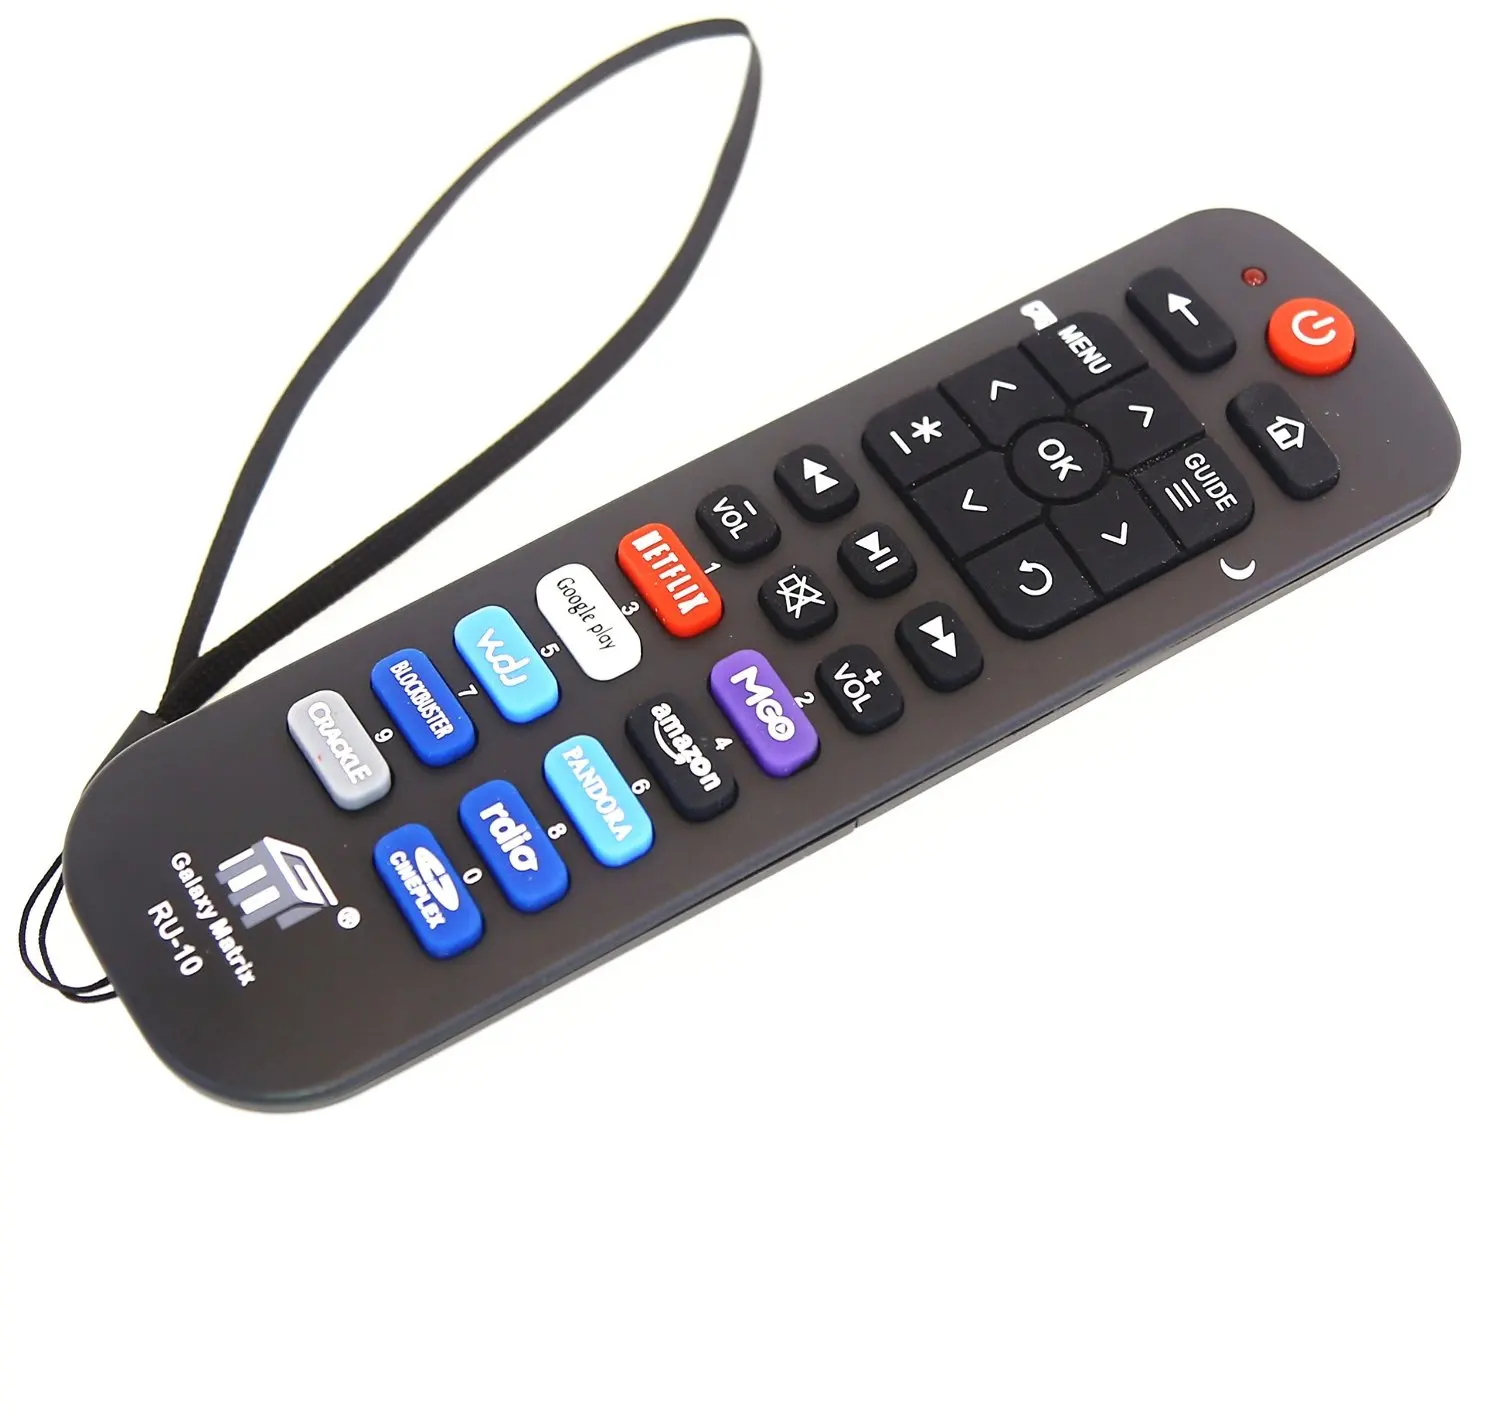 Cheap Tcl Tv Codes, find Tcl Tv Codes deals on line at